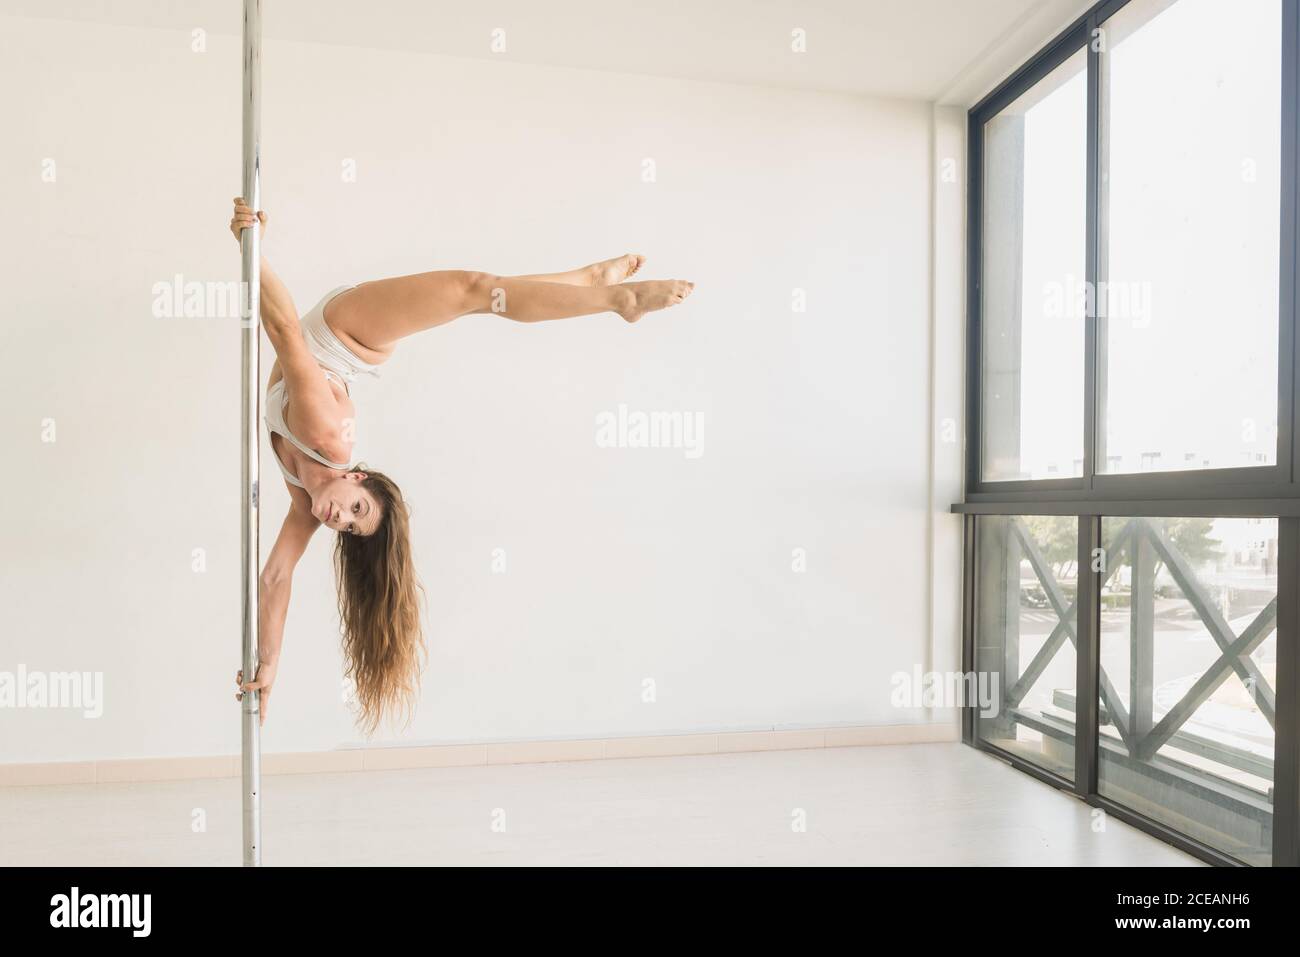 Young slim strong Woman practicing on pole in light room studio Stock Photo